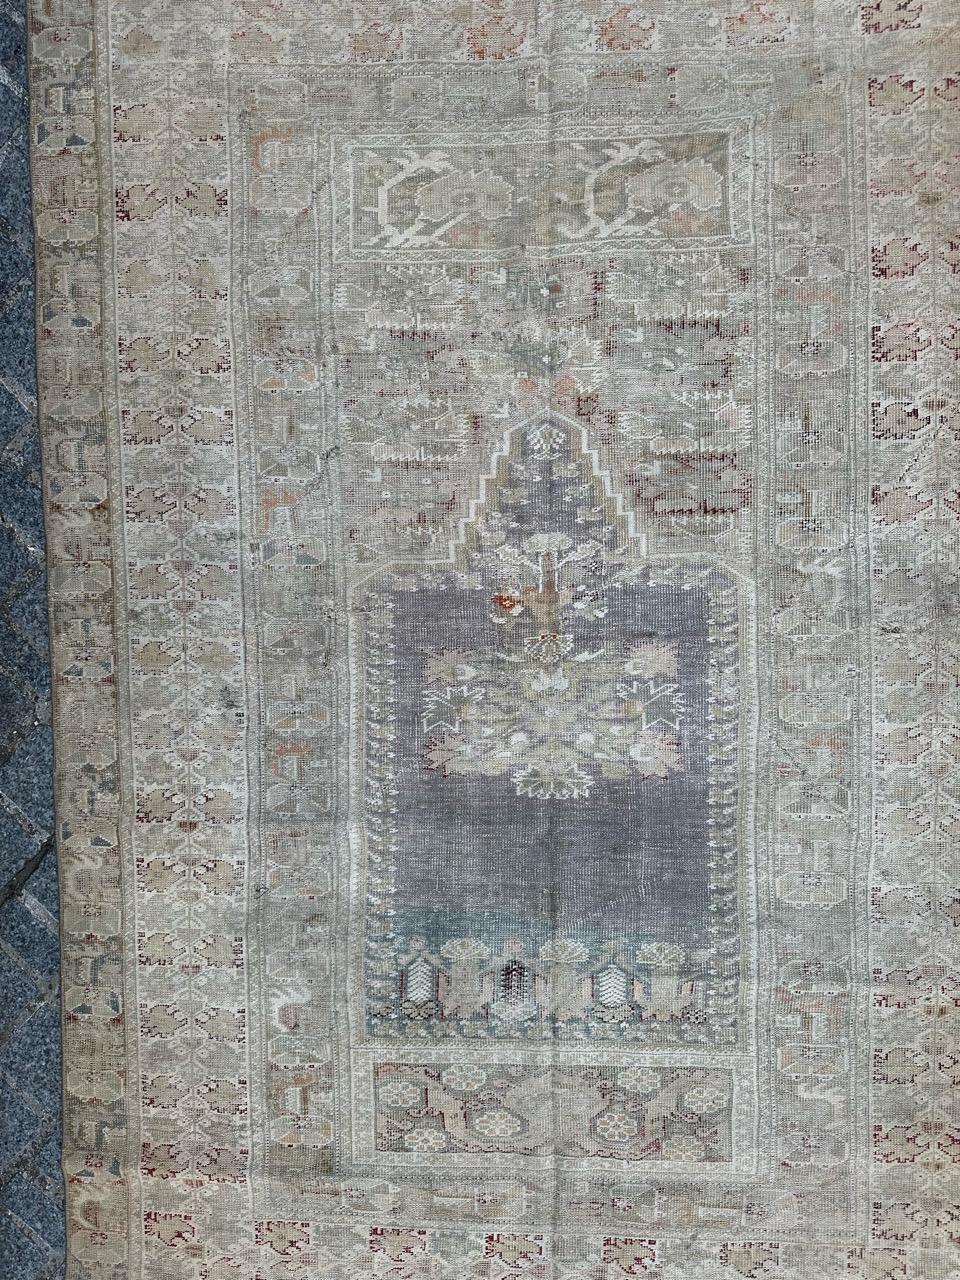 Pretty early 19th century Turkish rug from Yordes, with a beautiful mihrab design of very old Turkish rugs, and nice natural colours, used an uniform wears and little damage, due to the age and the use. Entirely and finely hand knotted with wool on